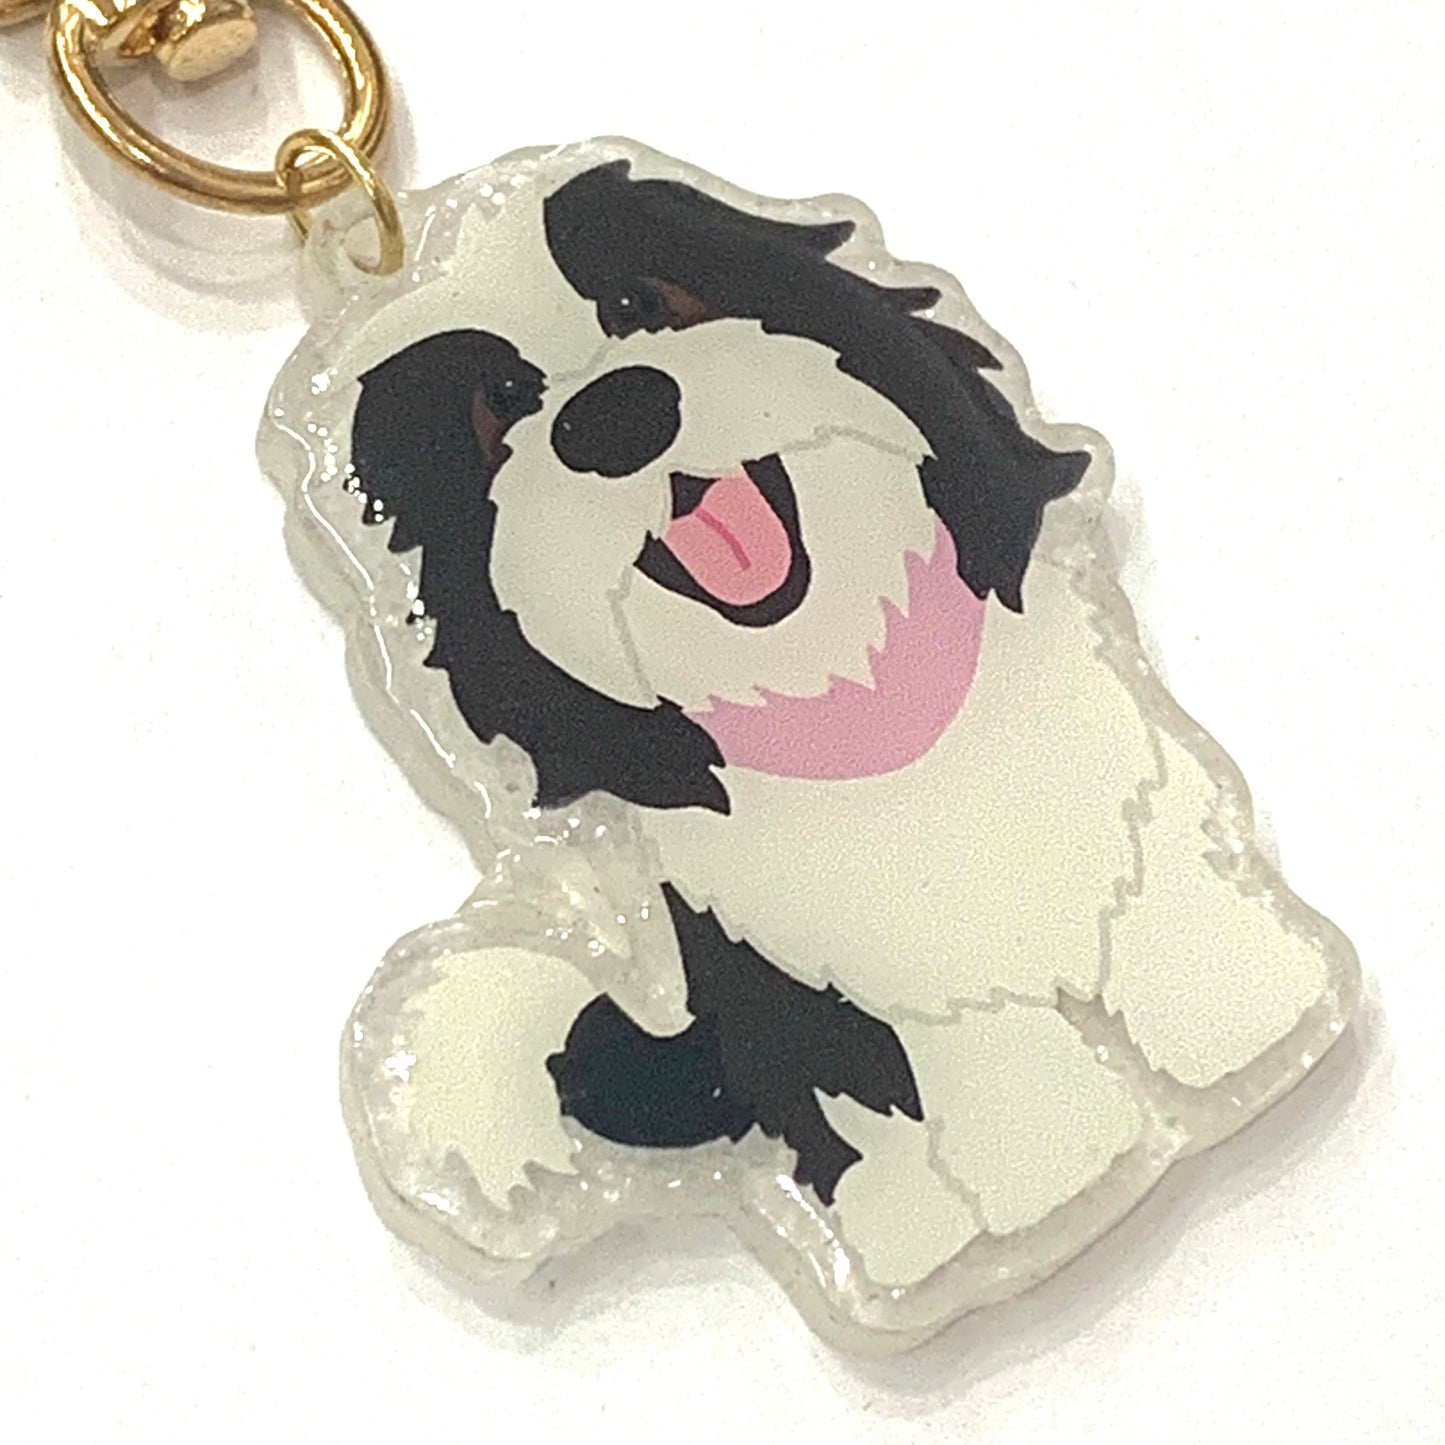 SHERBET CANDY- Molly the Happy Dog Keyring